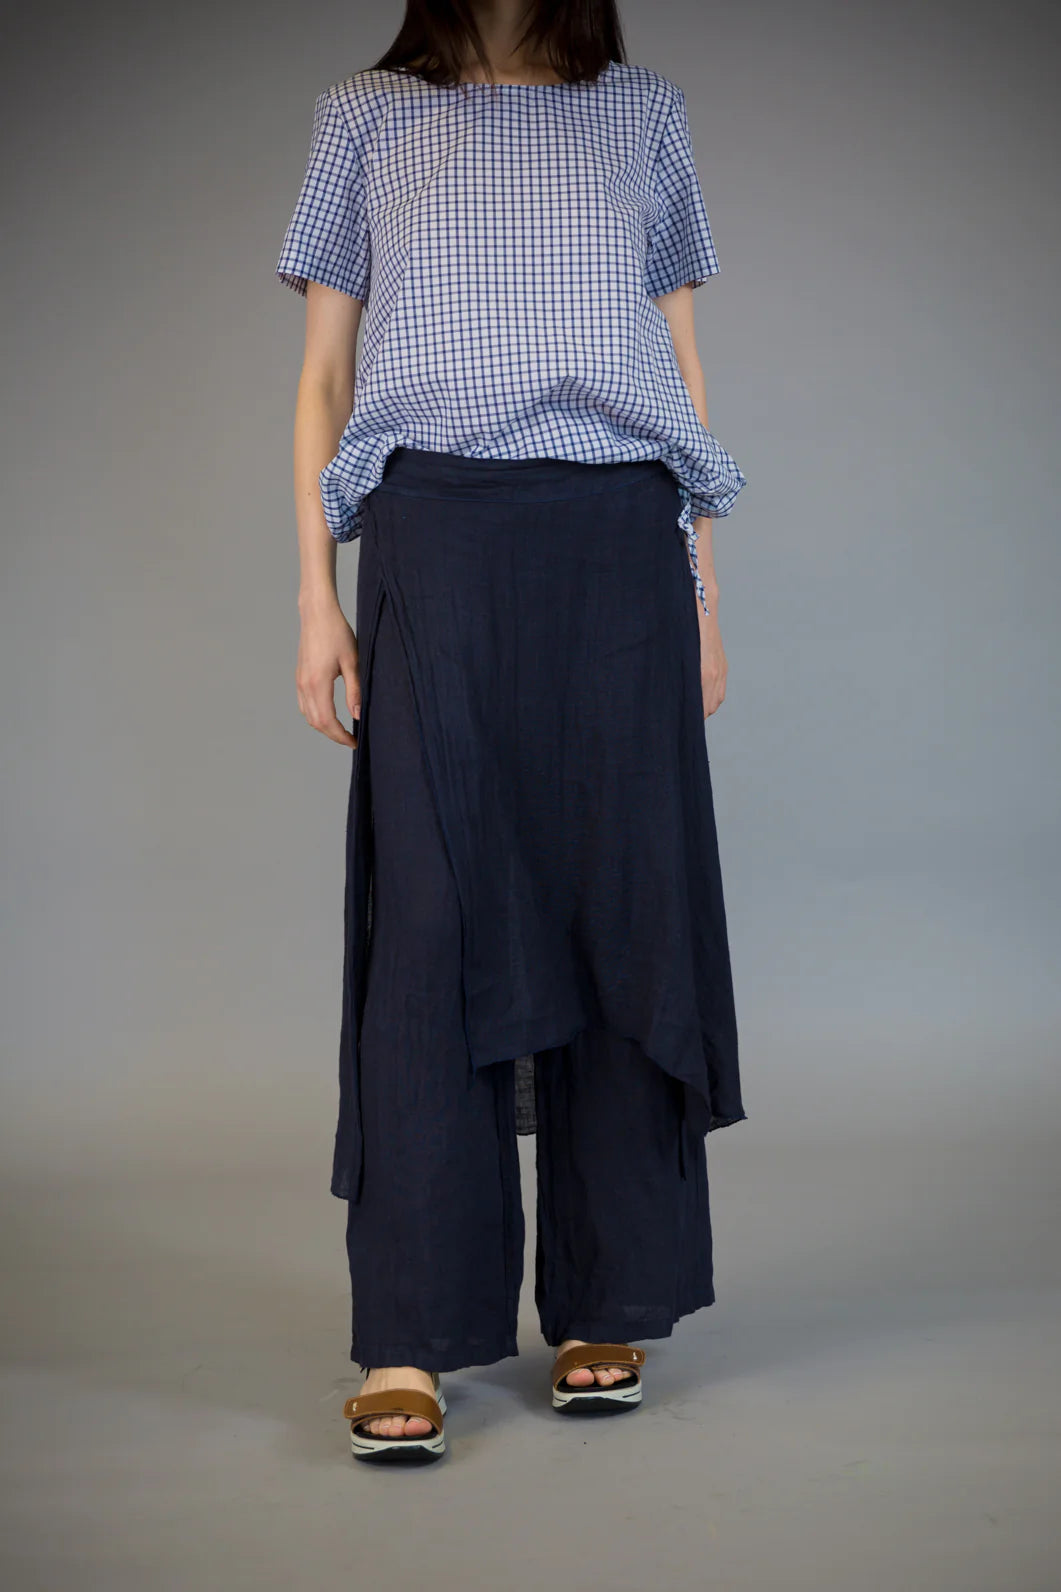 Paolo Tricot Sale, CS10976 Linen Skirt Pant 50% Off Regular Price